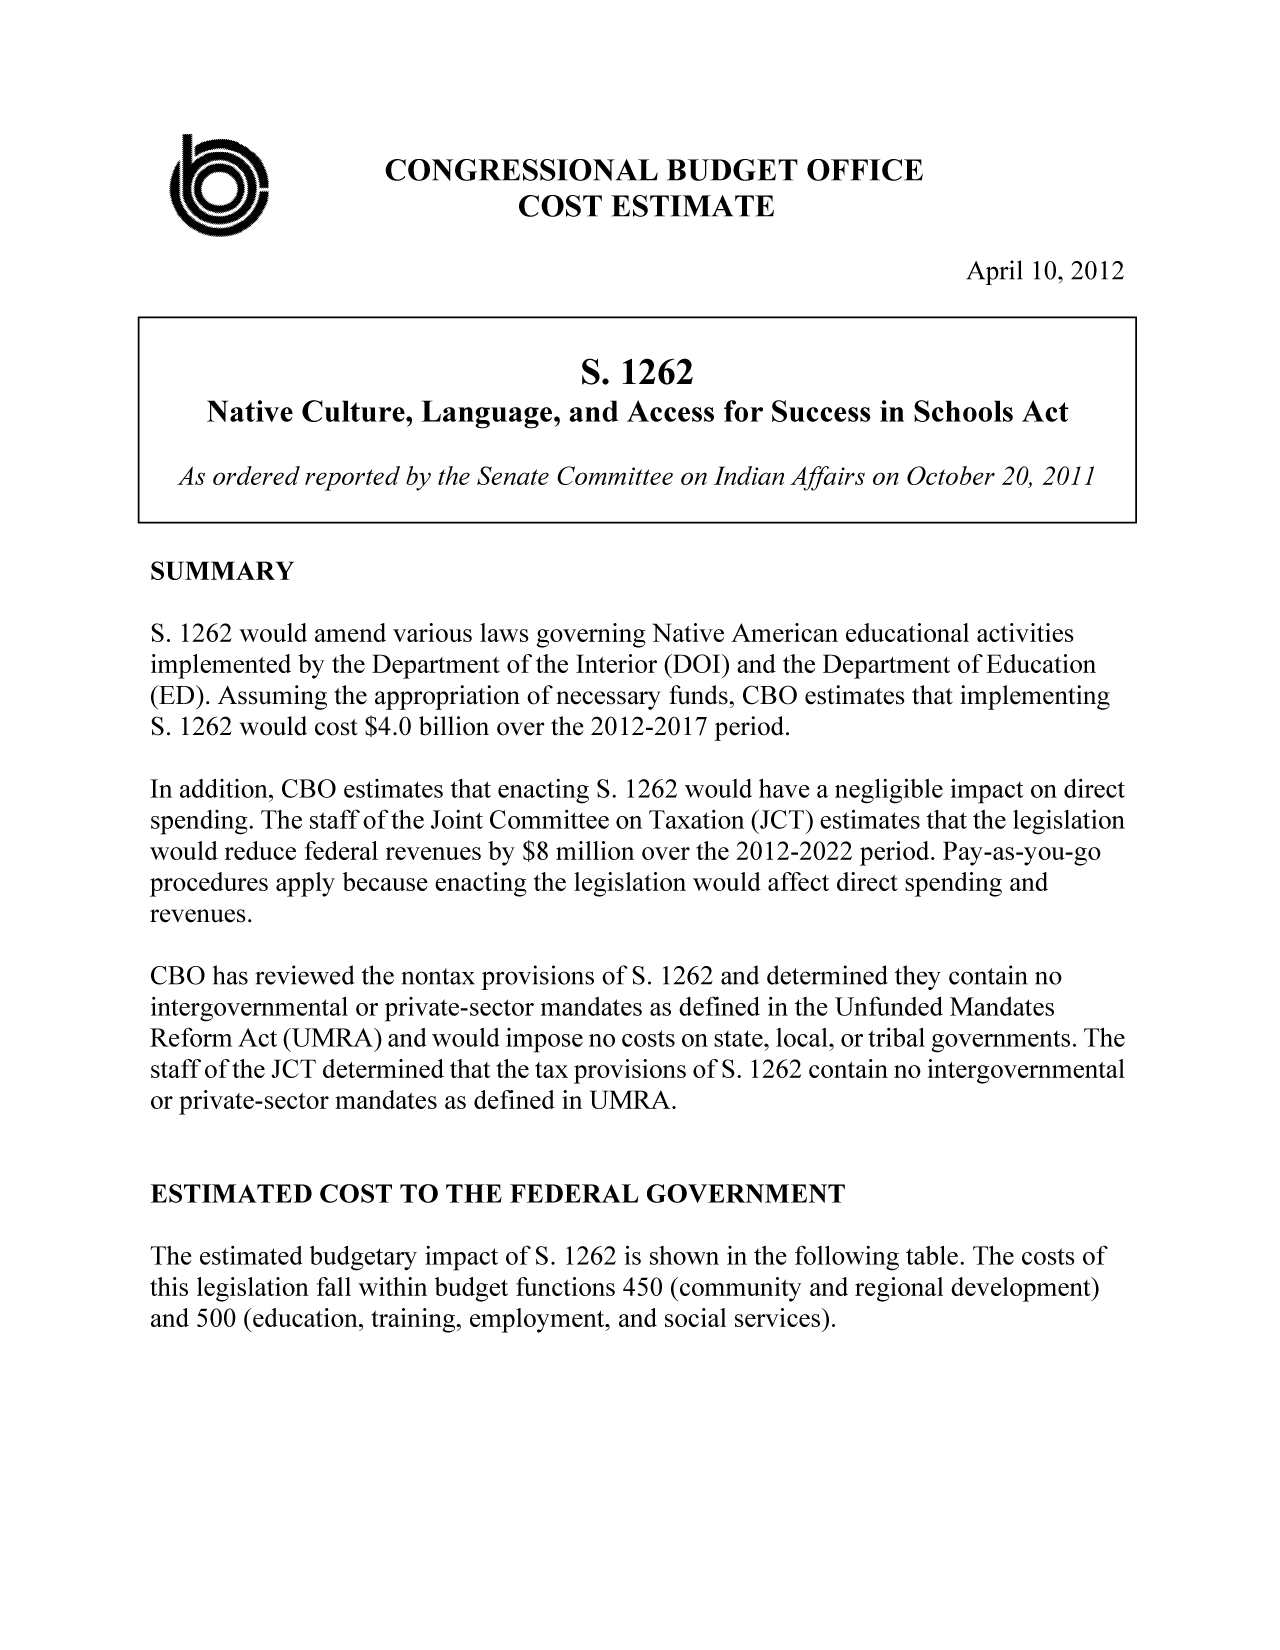 handle is hein.congrec/cbo10696 and id is 1 raw text is: CONGRESSIONAL BUDGET OFFICE
COST ESTIMATE
April 10, 2012
S. 1262
Native Culture, Language, and Access for Success in Schools Act
As ordered reported by the Senate Committee on Indian Affairs on October 20, 2011
SUMMARY
S. 1262 would amend various laws governing Native American educational activities
implemented by the Department of the Interior (DOI) and the Department of Education
(ED). Assuming the appropriation of necessary funds, CBO estimates that implementing
S. 1262 would cost $4.0 billion over the 2012-2017 period.
In addition, CBO estimates that enacting S. 1262 would have a negligible impact on direct
spending. The staff of the Joint Committee on Taxation (JCT) estimates that the legislation
would reduce federal revenues by $8 million over the 2012-2022 period. Pay-as-you-go
procedures apply because enacting the legislation would affect direct spending and
revenues.
CBO has reviewed the nontax provisions of S. 1262 and determined they contain no
intergovernmental or private-sector mandates as defined in the Unfunded Mandates
Reform Act (UMRA) and would impose no costs on state, local, or tribal governments. The
staff of the JCT determined that the tax provisions of S. 1262 contain no intergovernmental
or private-sector mandates as defined in UMRA.
ESTIMATED COST TO THE FEDERAL GOVERNMENT
The estimated budgetary impact of S. 1262 is shown in the following table. The costs of
this legislation fall within budget functions 450 (community and regional development)
and 500 (education, training, employment, and social services).


